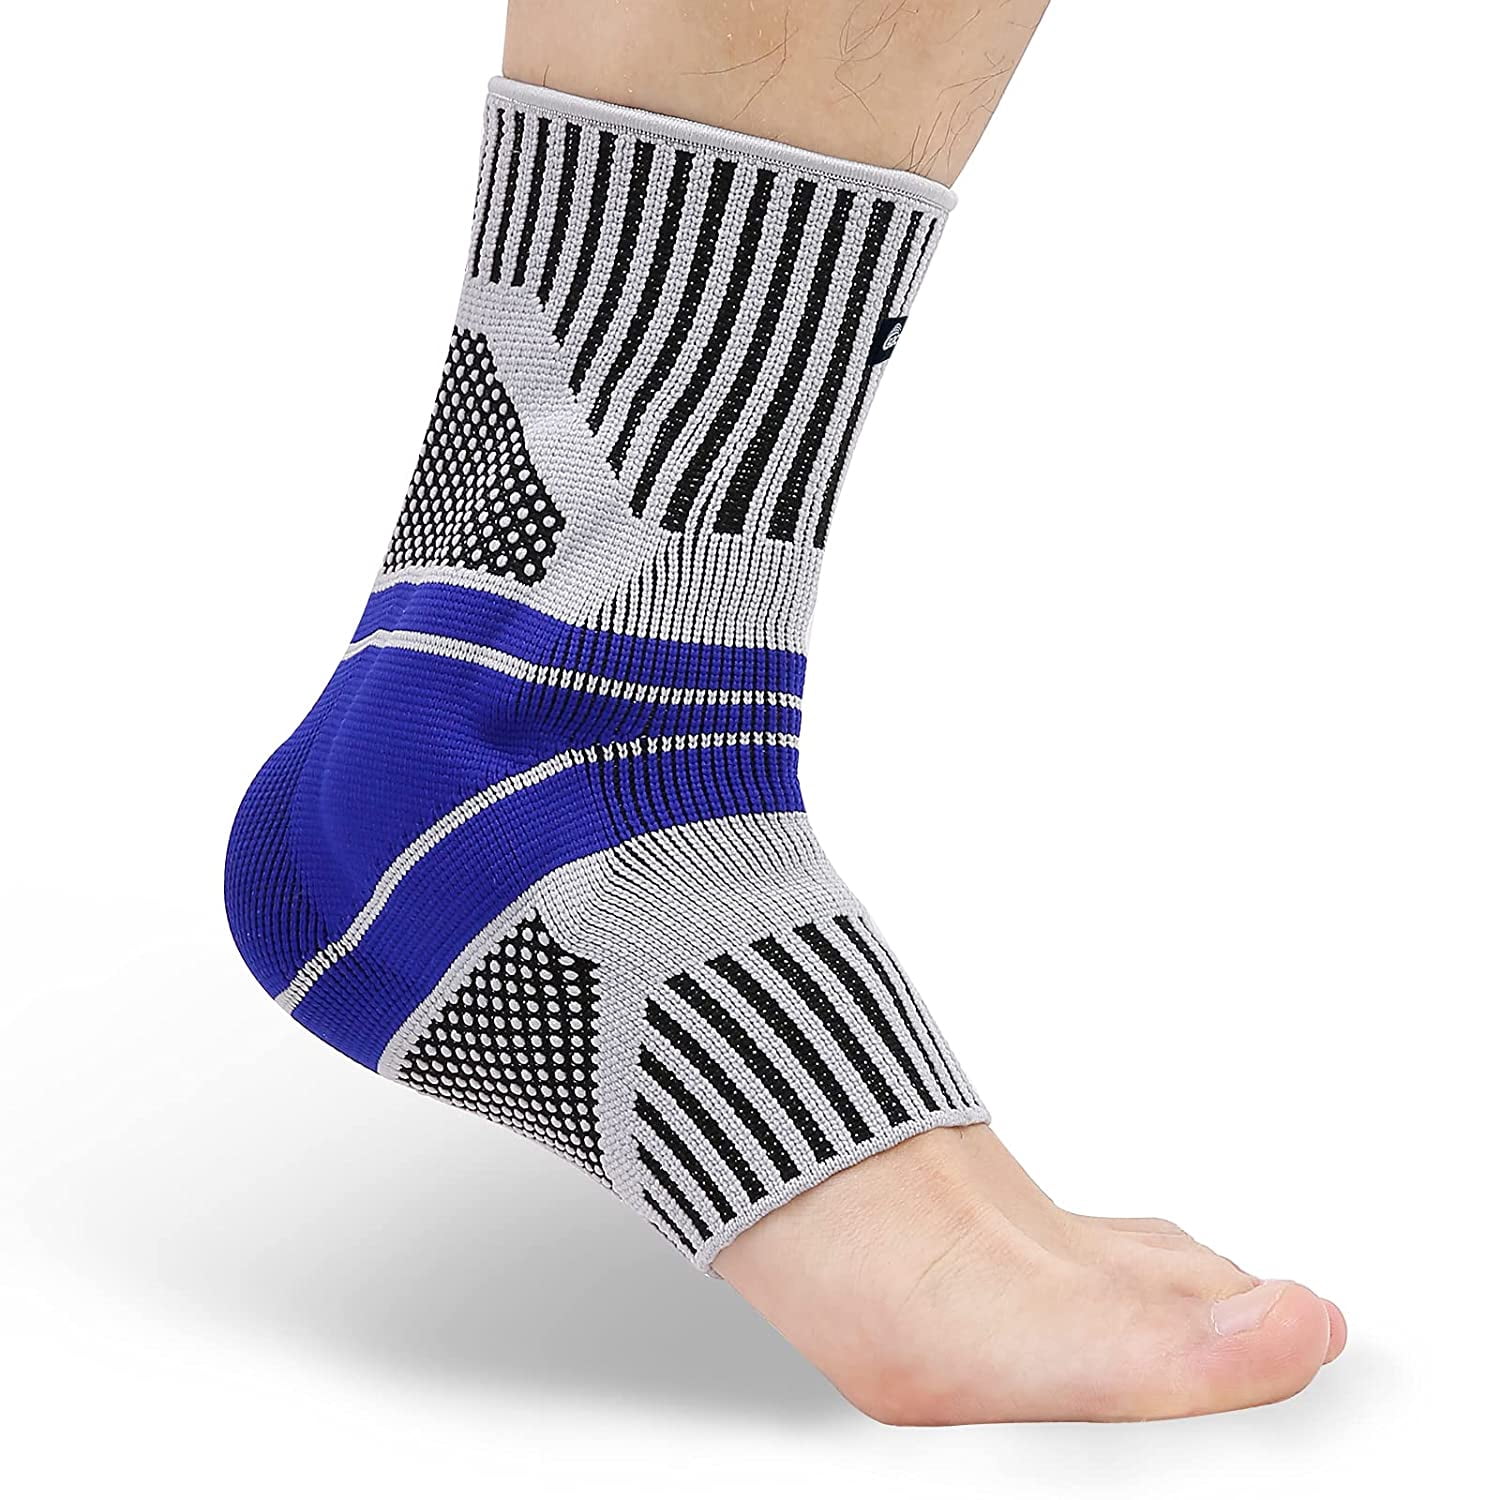 Ankle Brace Compression Support Sleeve With Silicone Gel-Plantar ...